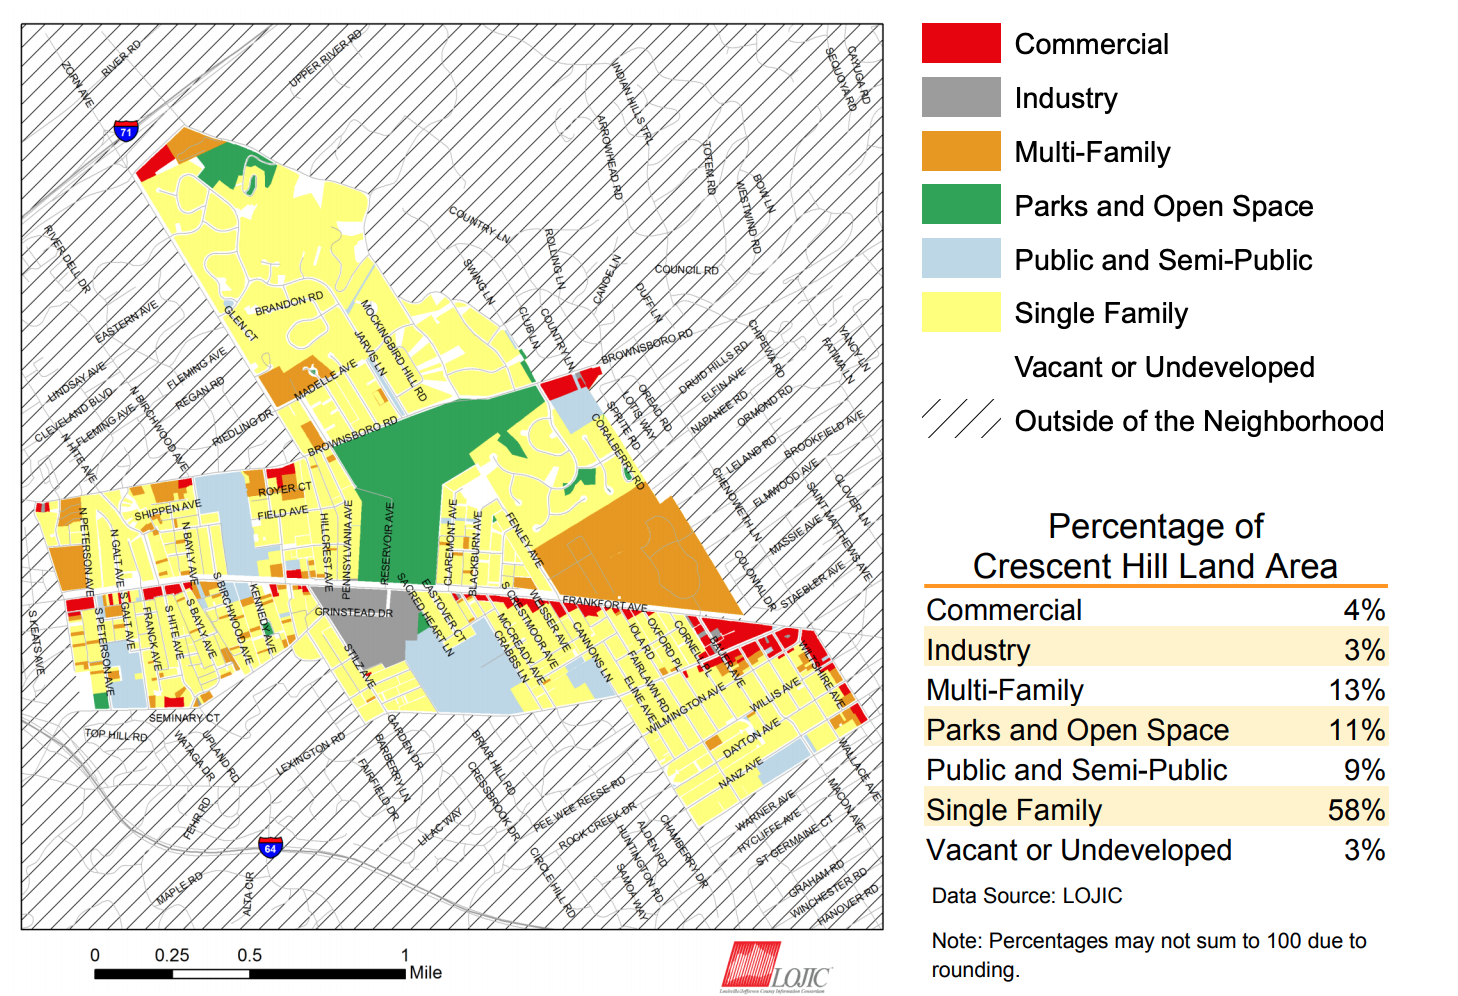 Land use for Crescent Hill Neighborhood Louisville, KY